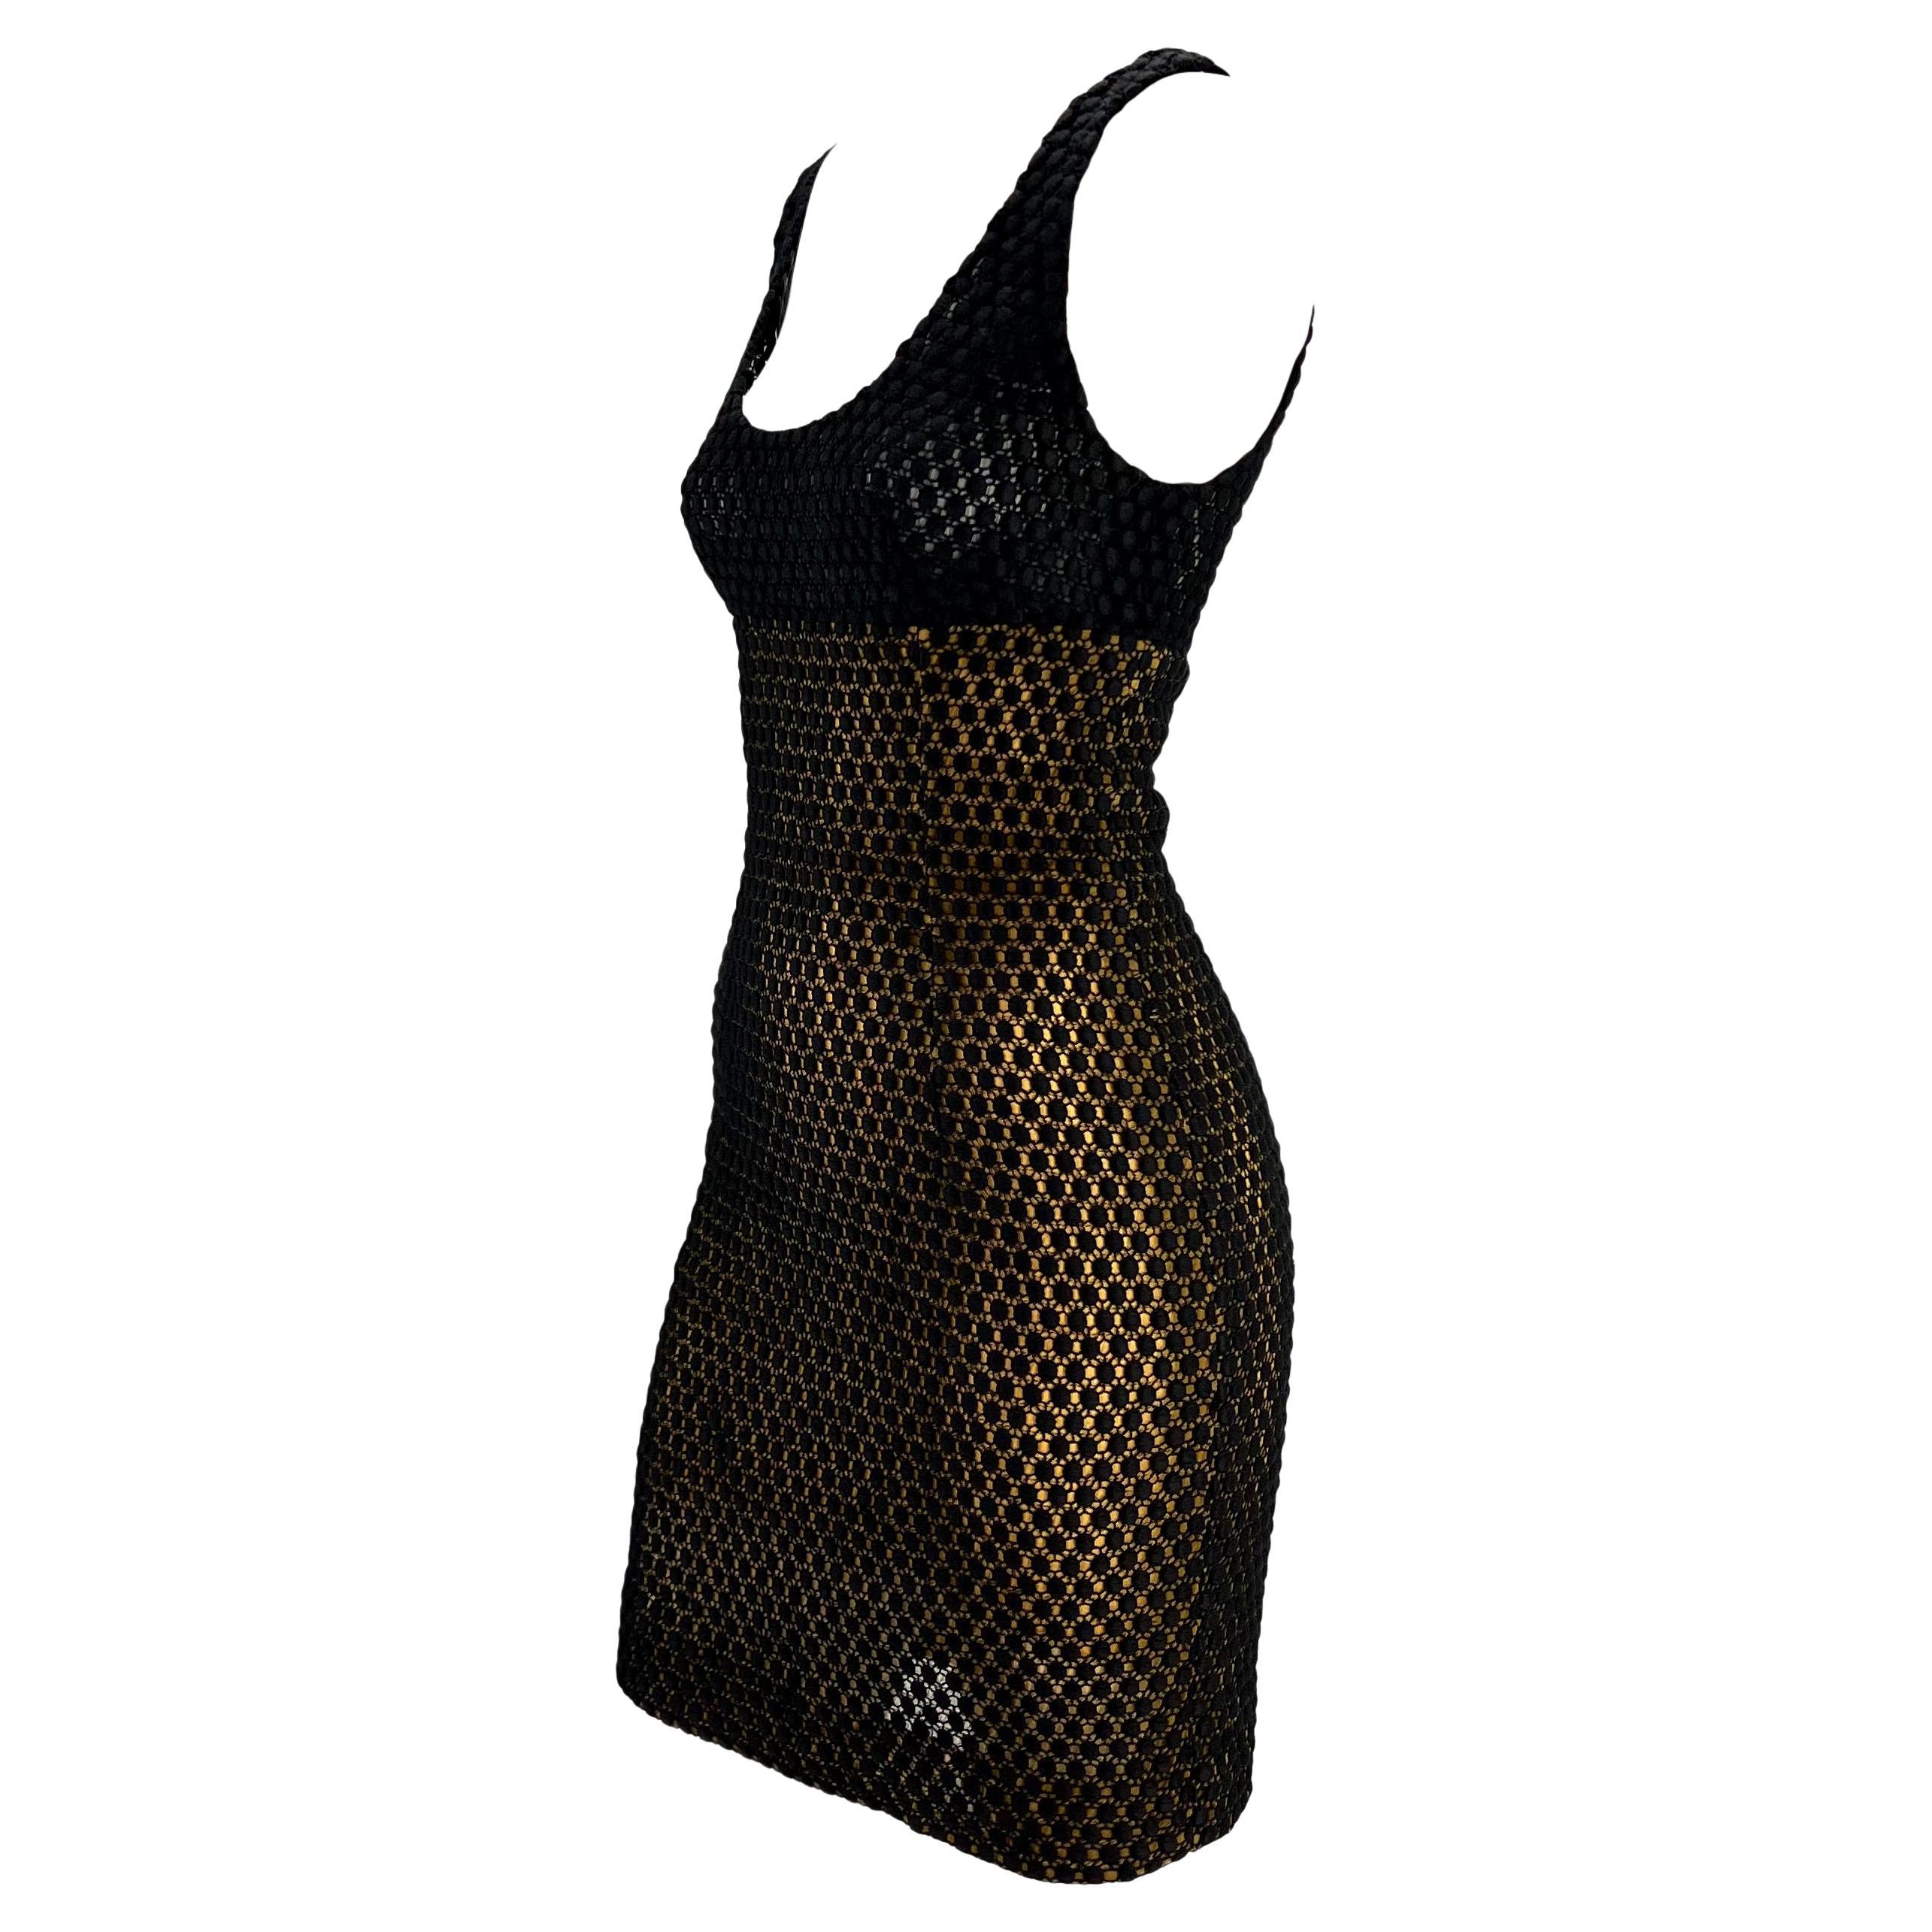 Presenting a sensual yellow and black knit Christian Dior Boutique dress, designed by Gianfranco Ferré. From the 1990s, this beautiful sleeveless dress features a knit polka dot pattern atop a yellow mesh at the body and black mesh at the bust. The